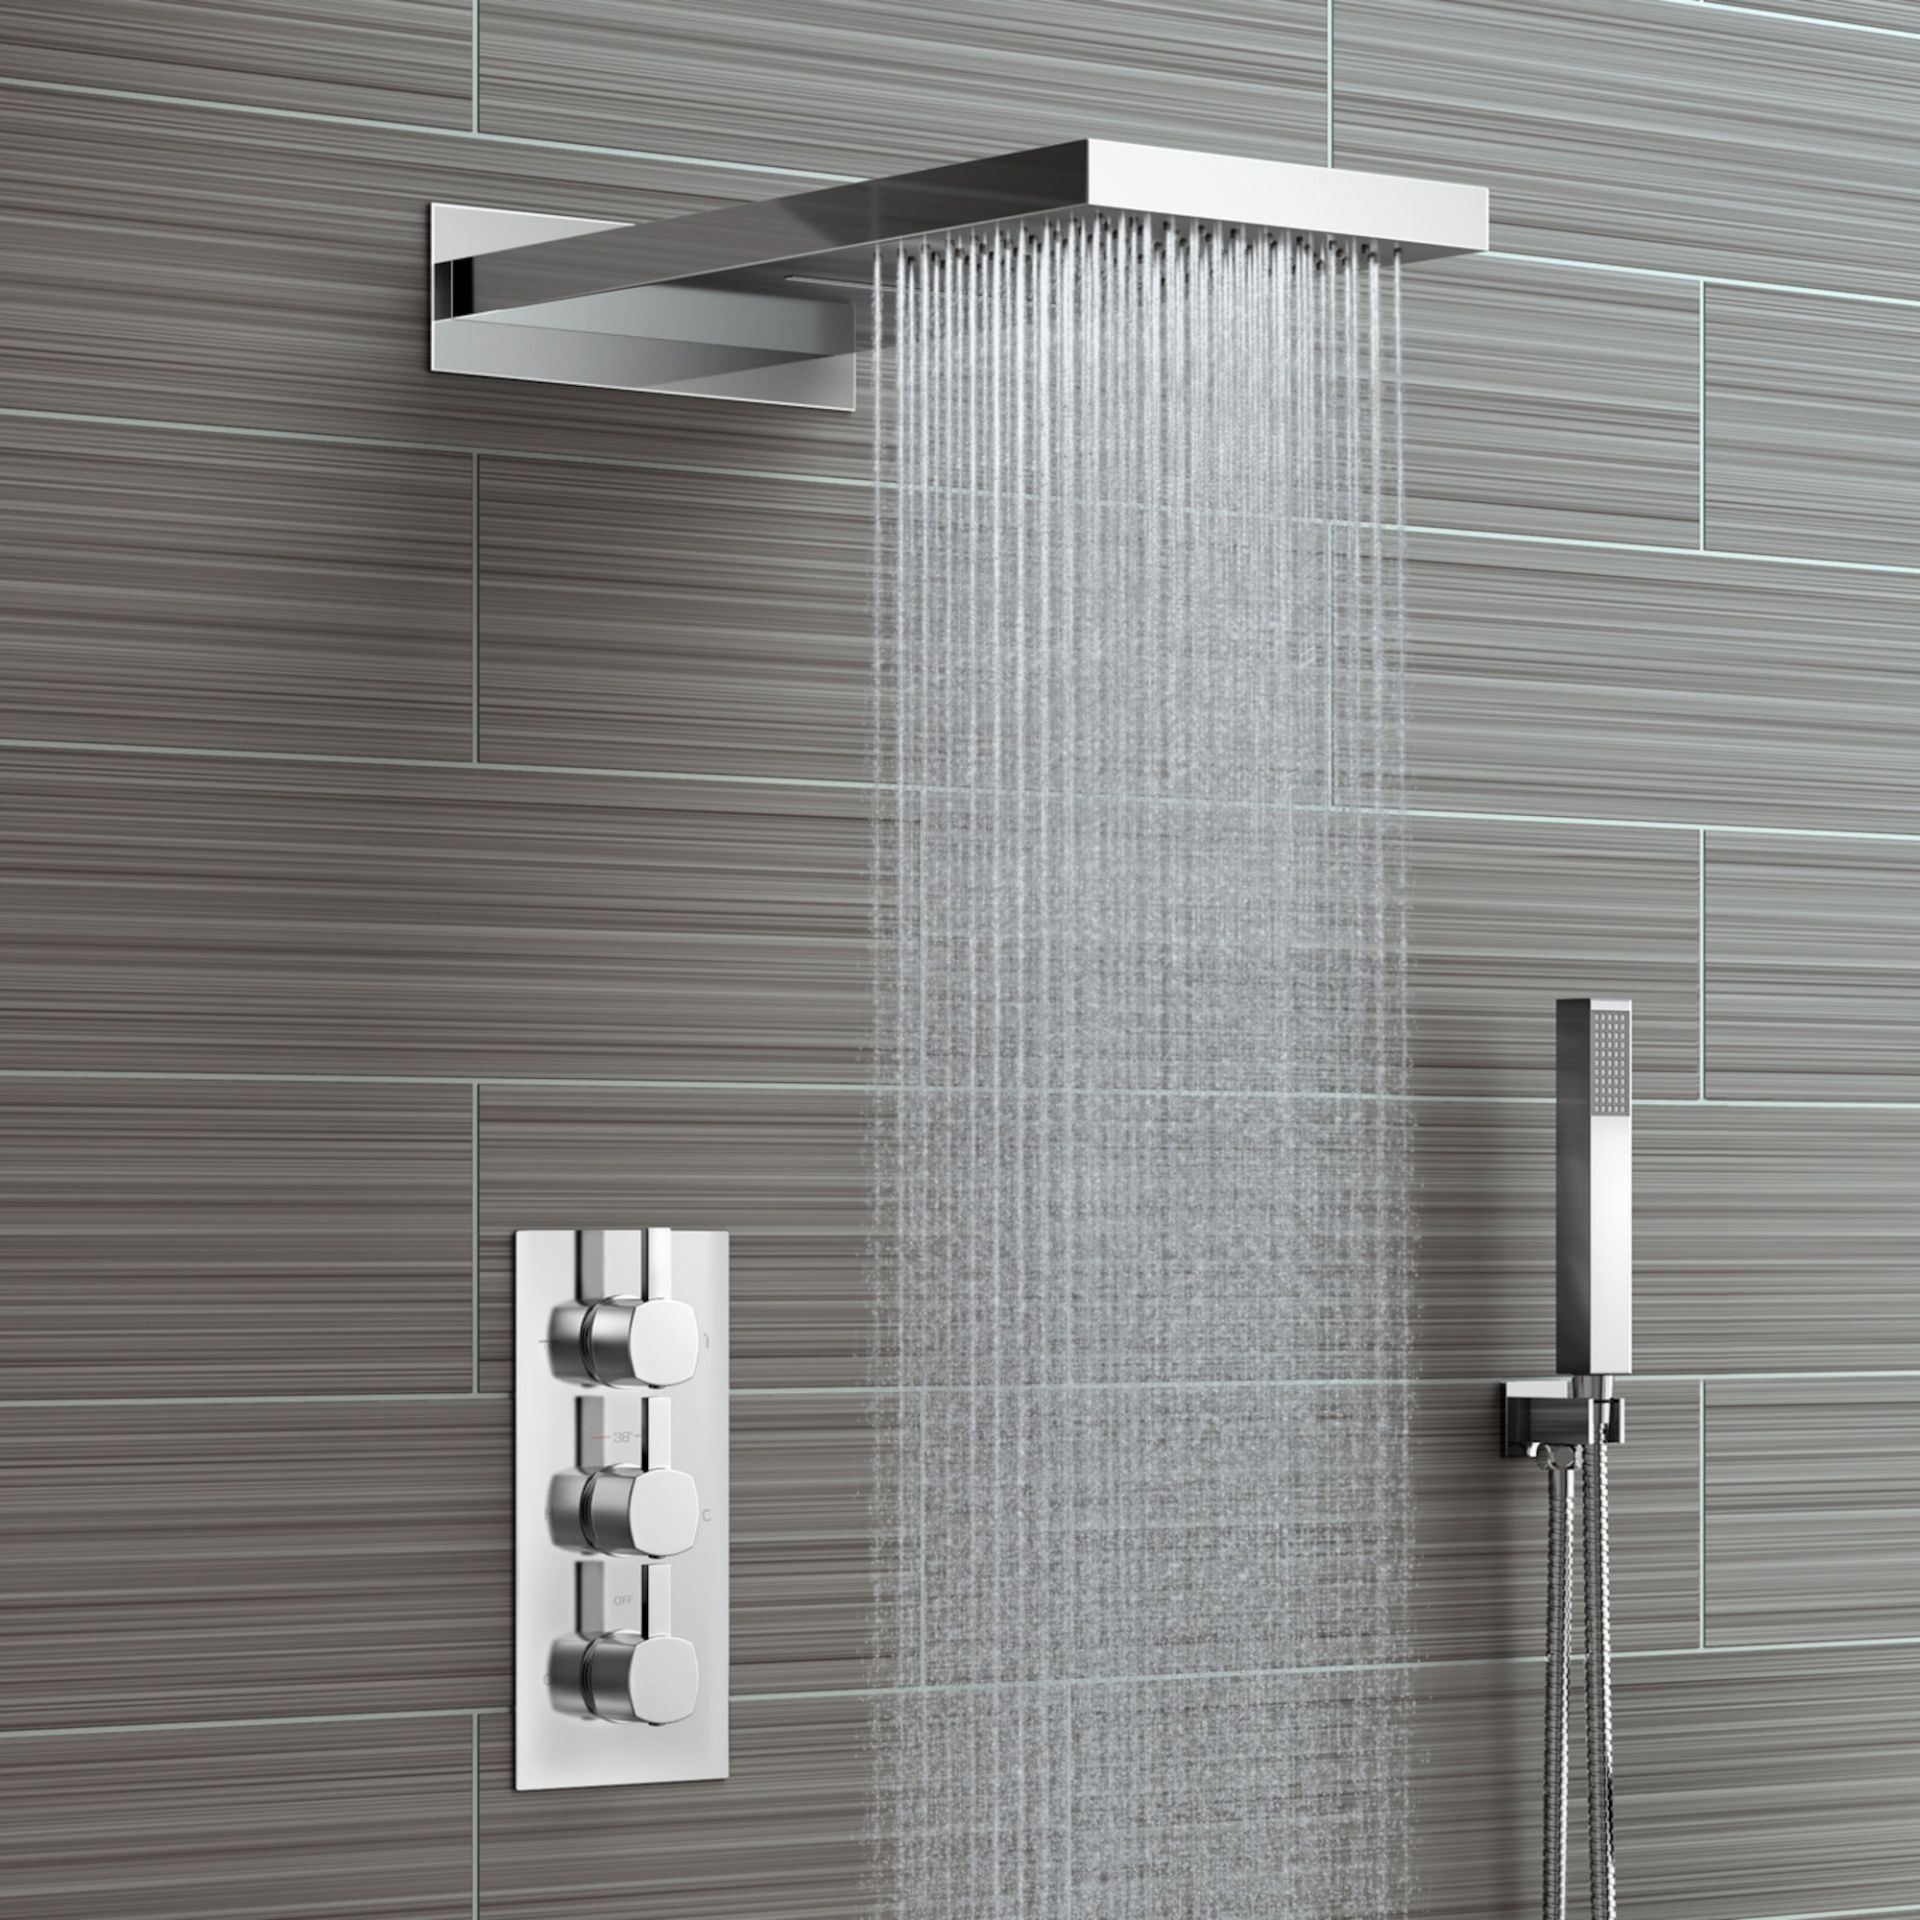 (G3) Rectangular Concealed Thermostatic Mixer Rainfall Shower Kit. RRP £699.99. Opt for either...